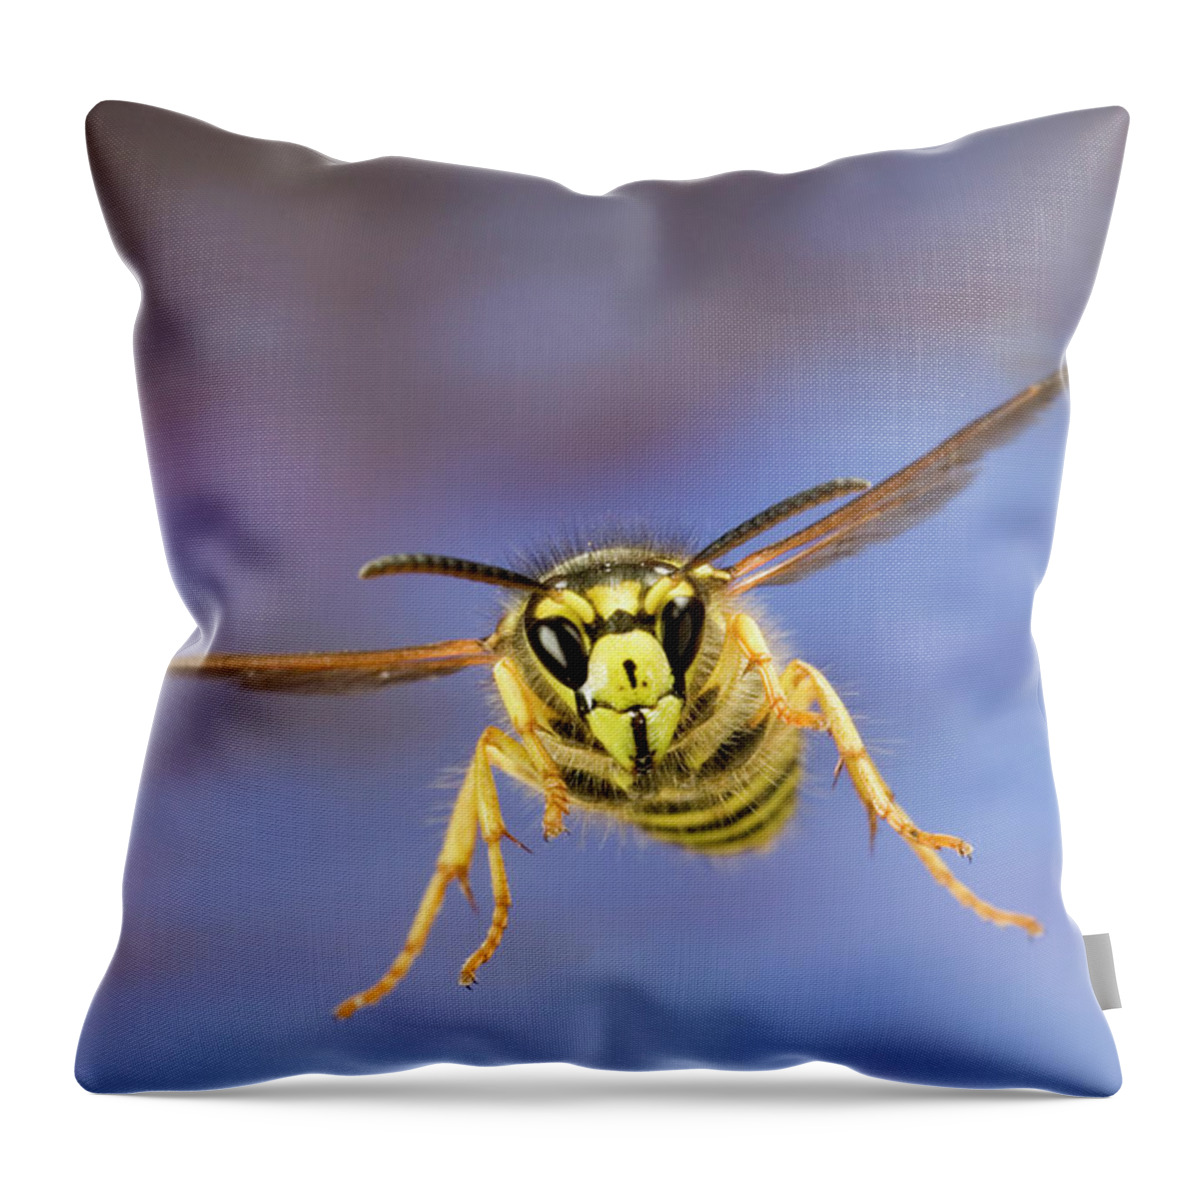 00640274 Throw Pillow featuring the photograph Yellowjacket Flying by Michael Durham